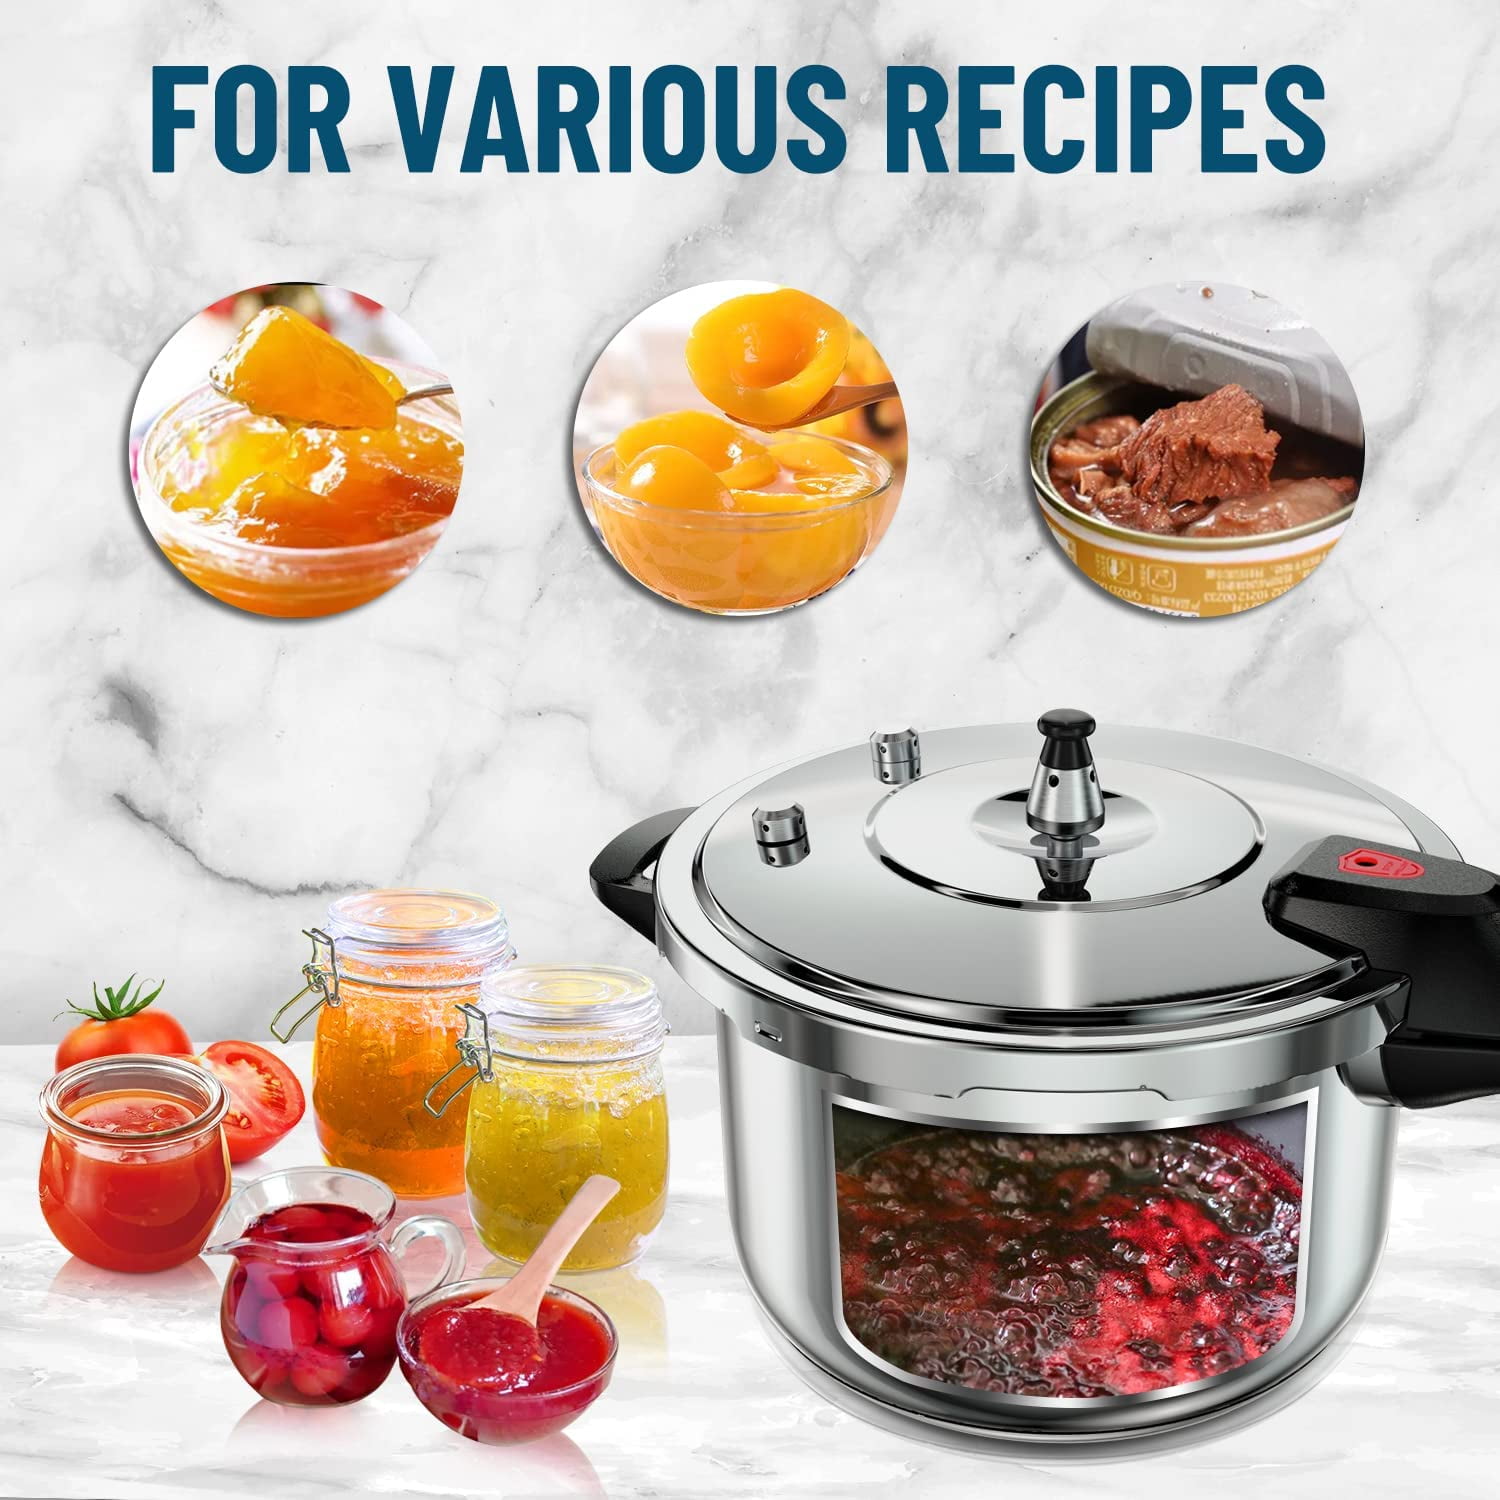 WantJoin Stainless Steel Pressure Cooker(Non-Aluminum),8 Quart Induction Compatible Pressure Cooker with Spring Valve Safeguard Devices,Compatible with Gas & Induction Cooker